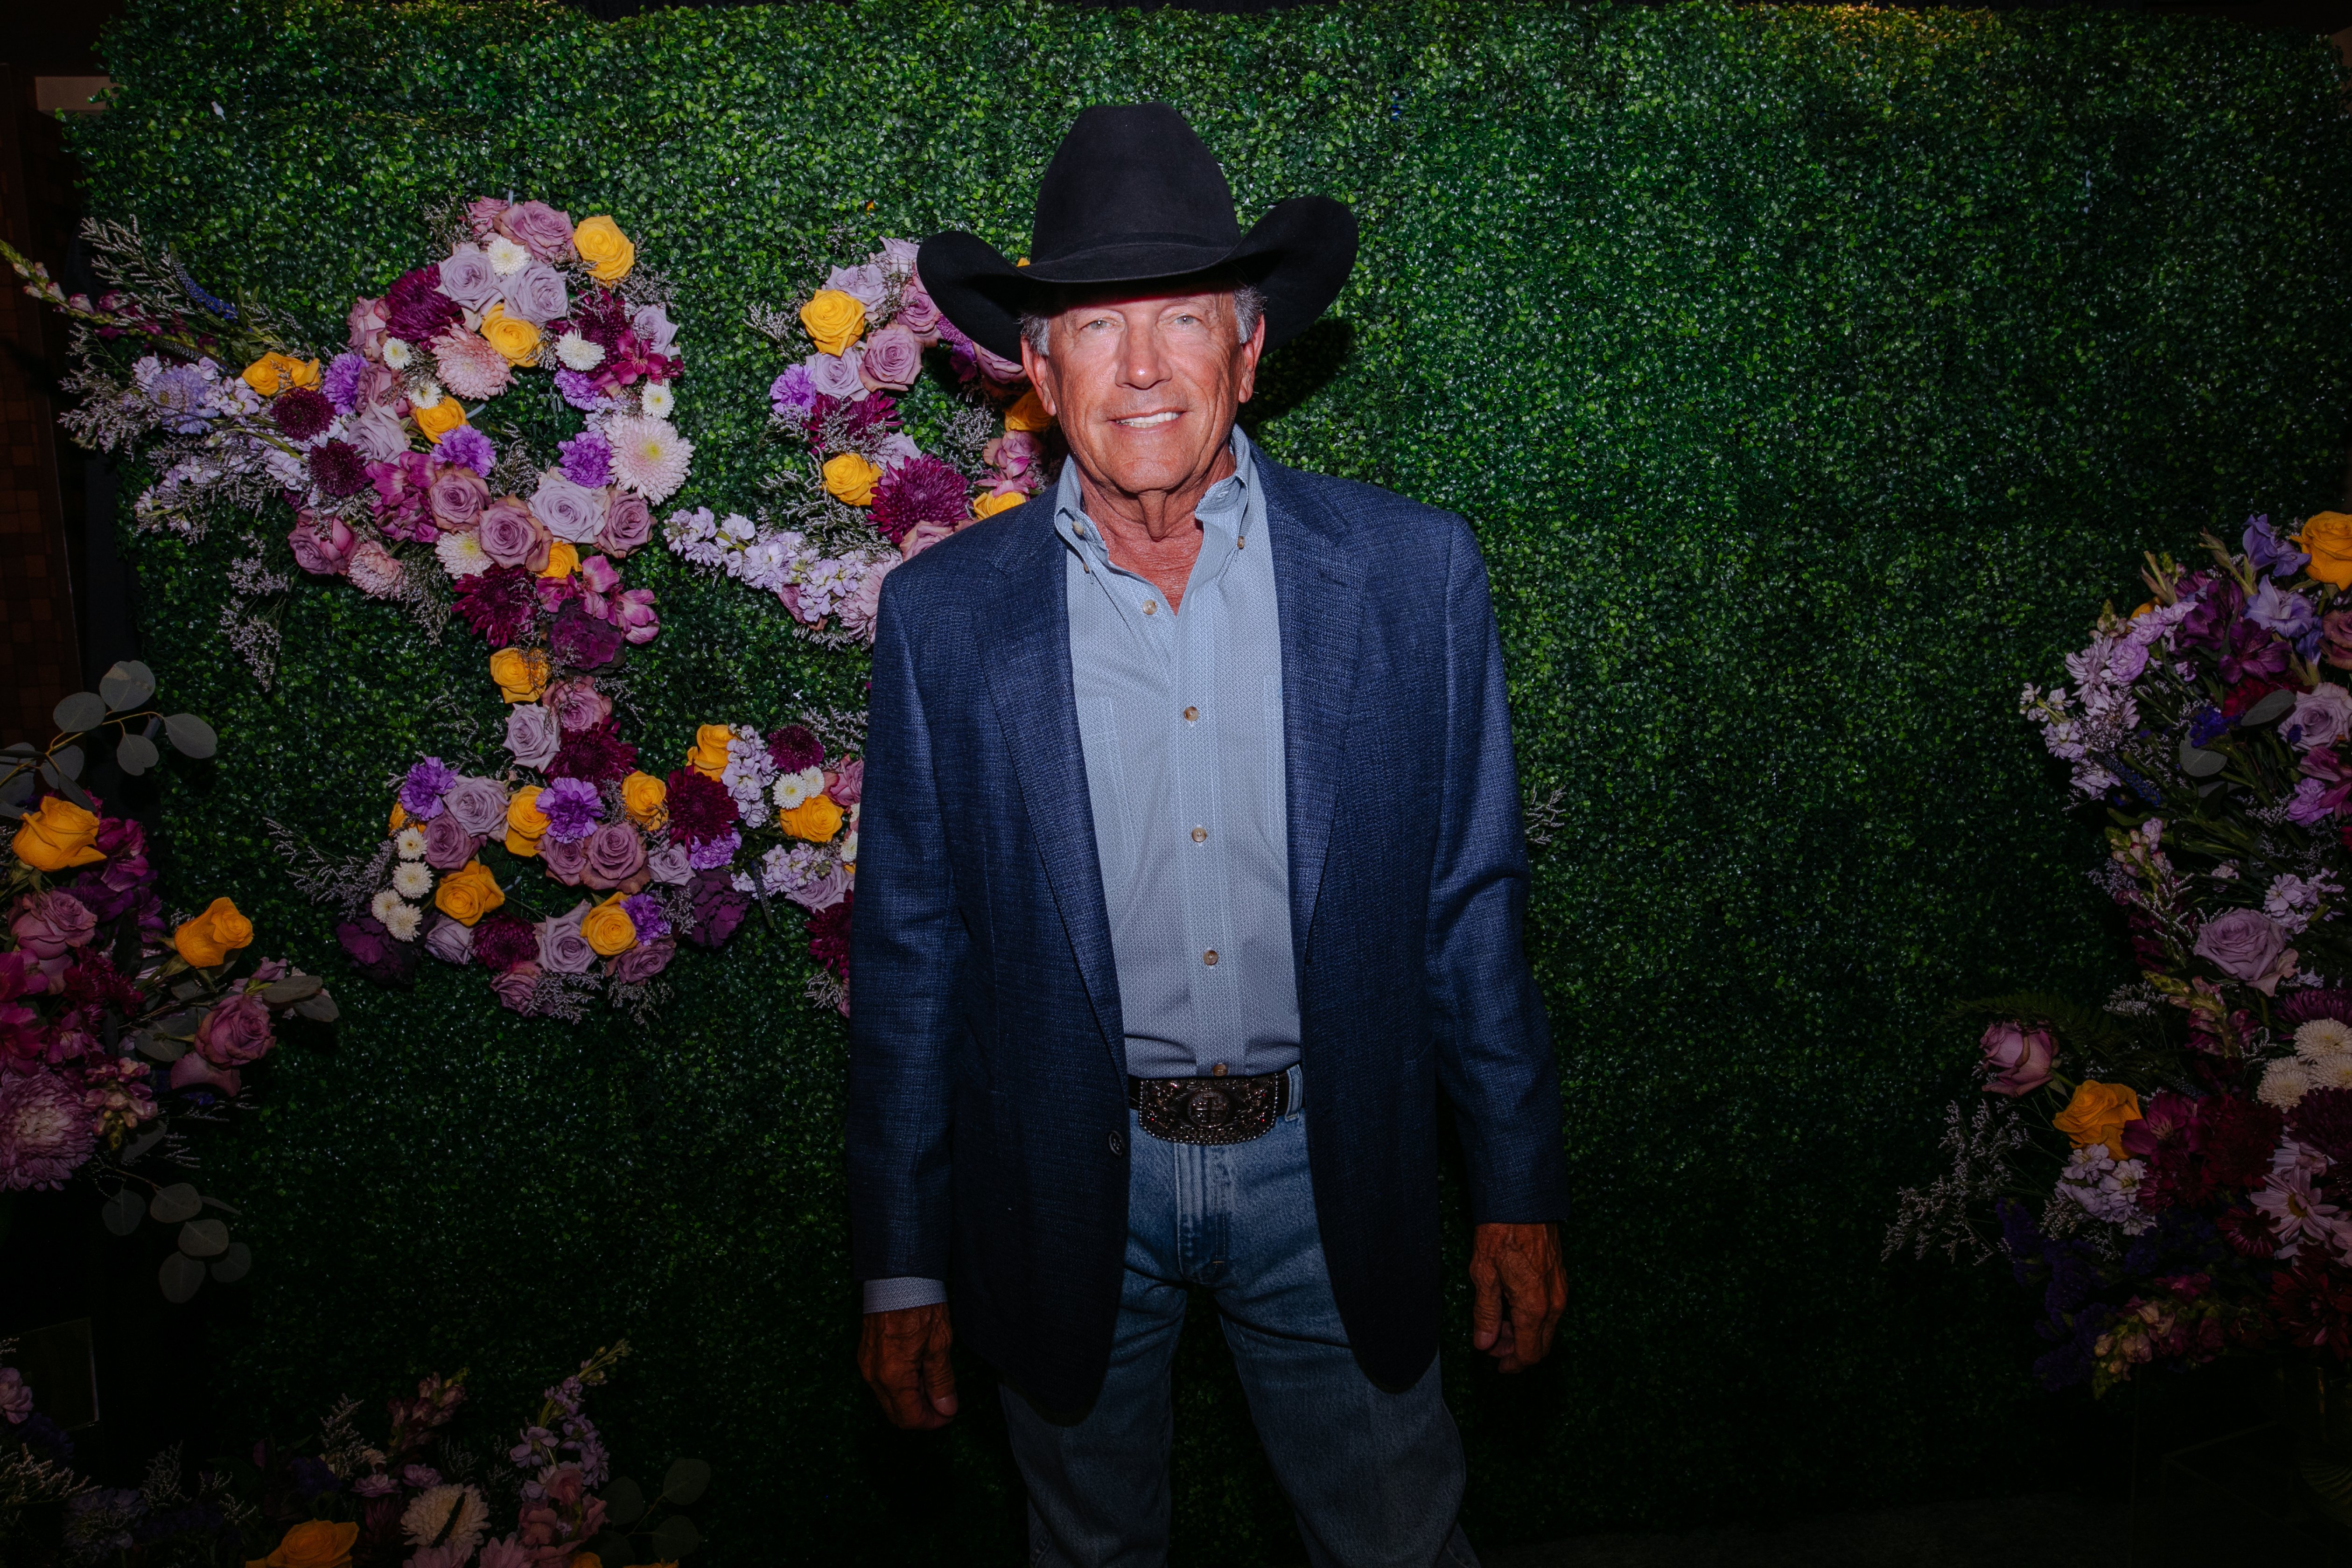 Country singer George Strait attends CMT Coal Miner's Daughter: A Celebration of the Life & Music of Loretta Lynn at Grand Ole Opry on October 30, 2022 in Nashville, Tennessee ┃Source: Getty Images